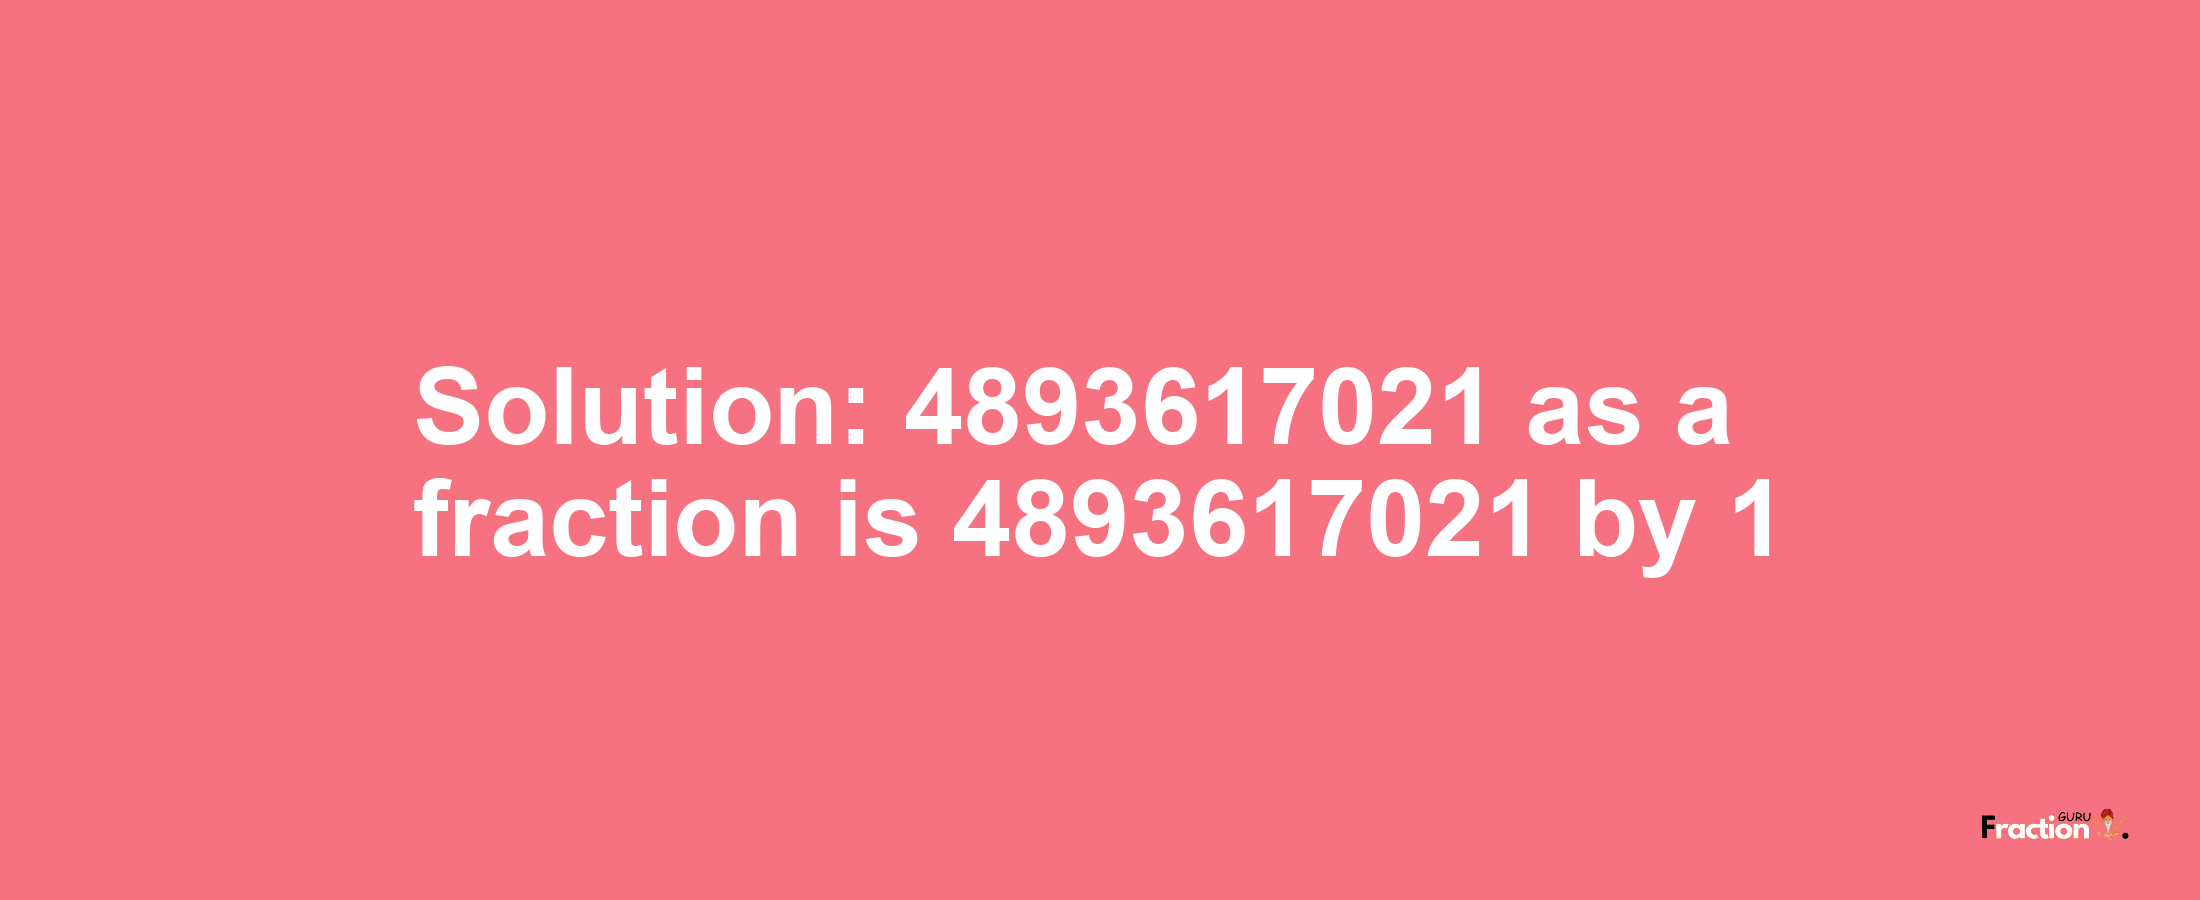 Solution:4893617021 as a fraction is 4893617021/1